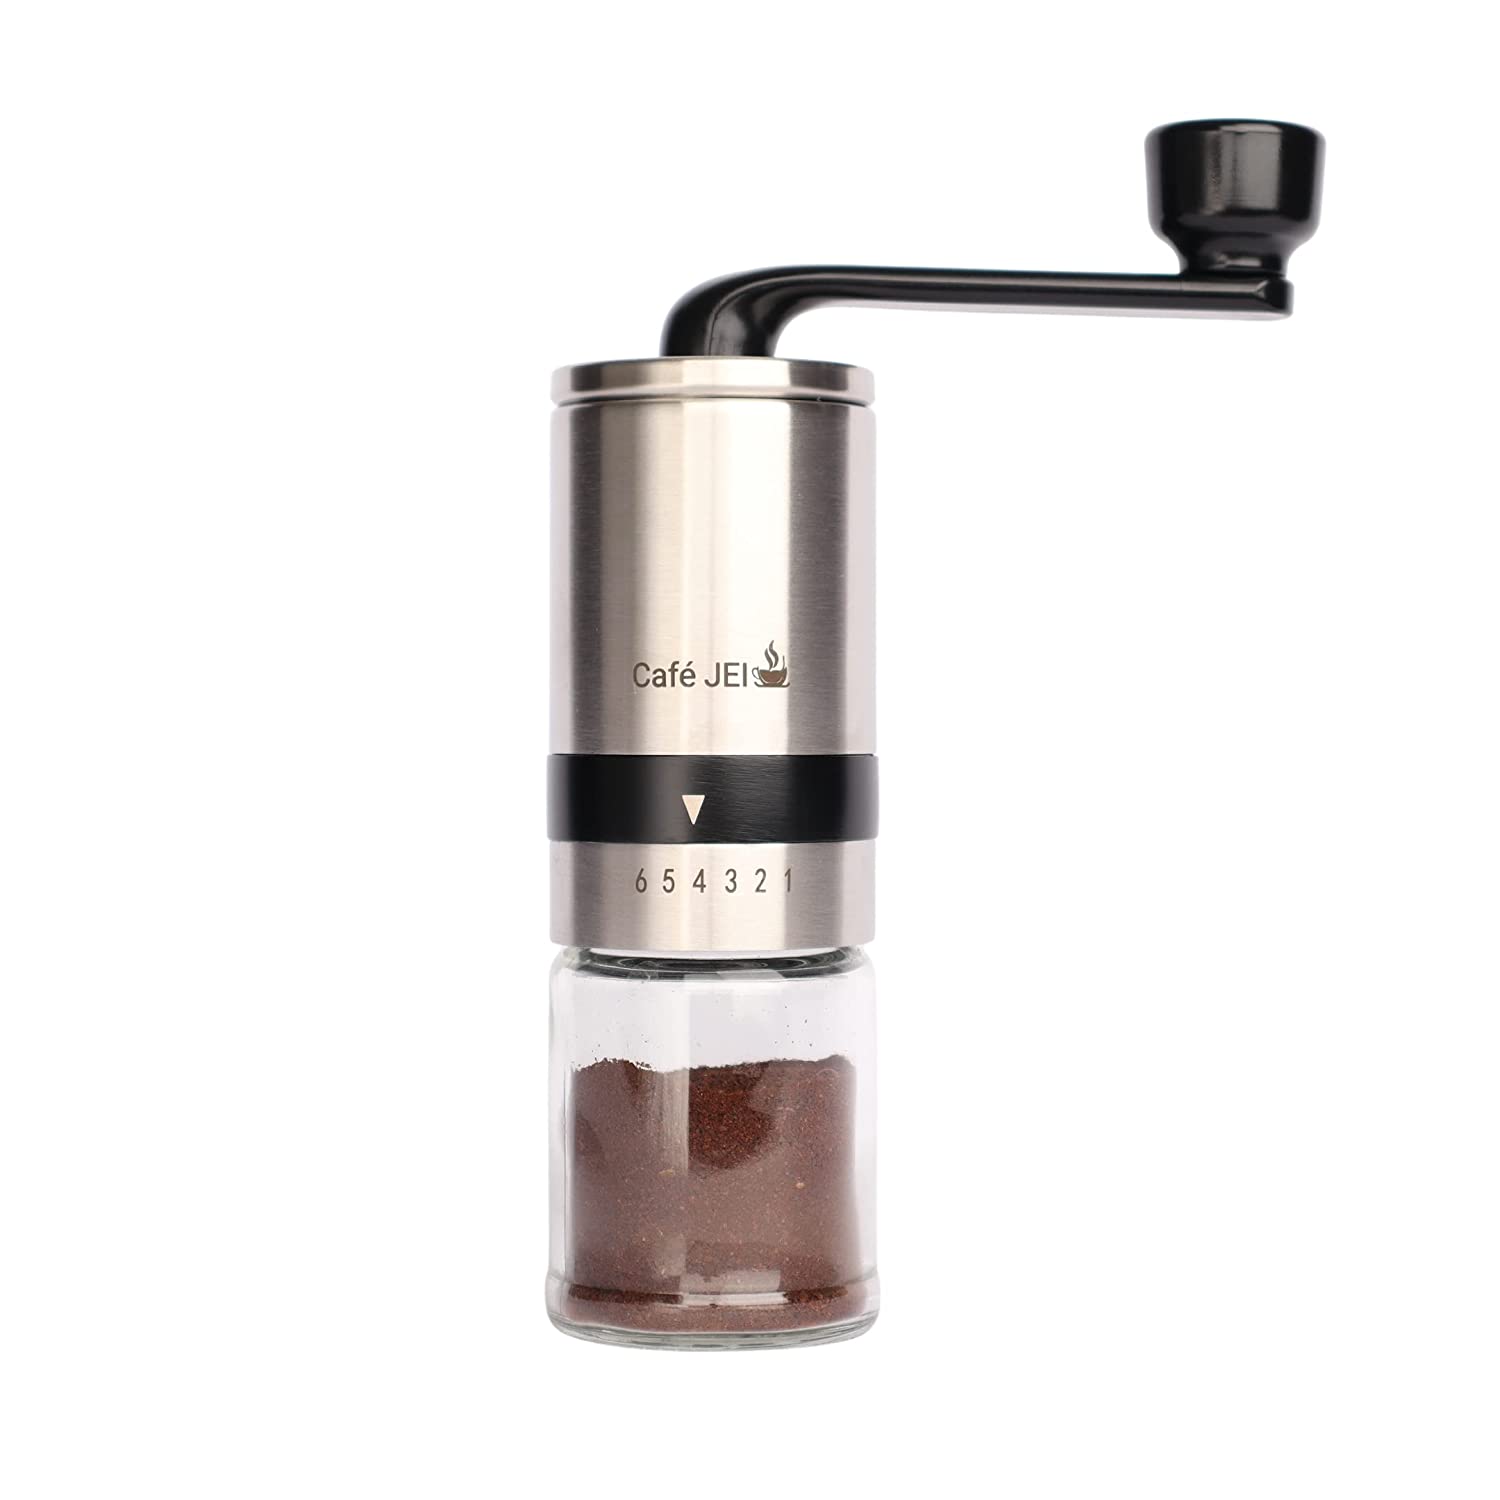 Cafe JEI Manual Coffee Grinder with Adjustable Settings – Ceramic Conical Burr Mill & Brushed Stainless Steel Body, Whole Bean Coffee Grinder for Drip Coffee, Moka Pot, Espresso, French Press (Silver)